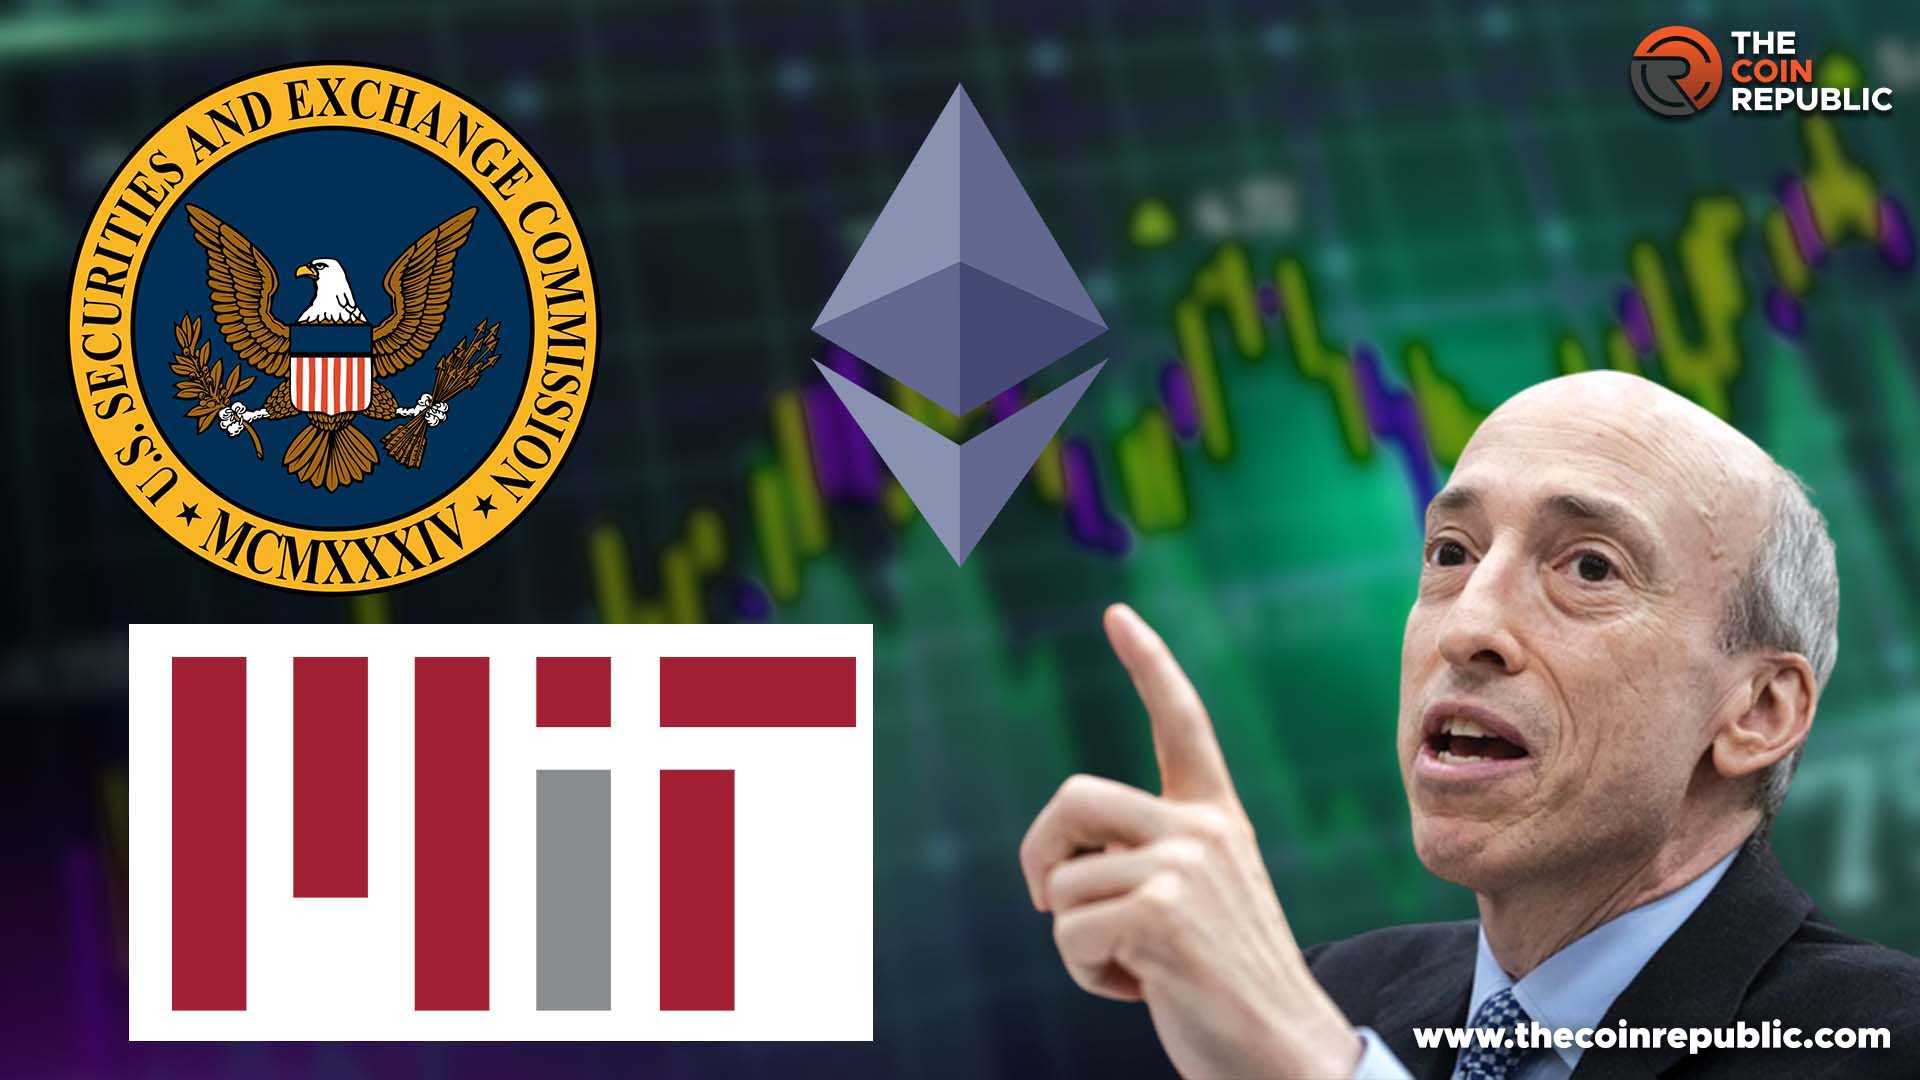 SEC Believes Ethereum is Not a Security – Gensler at MIT in 2018